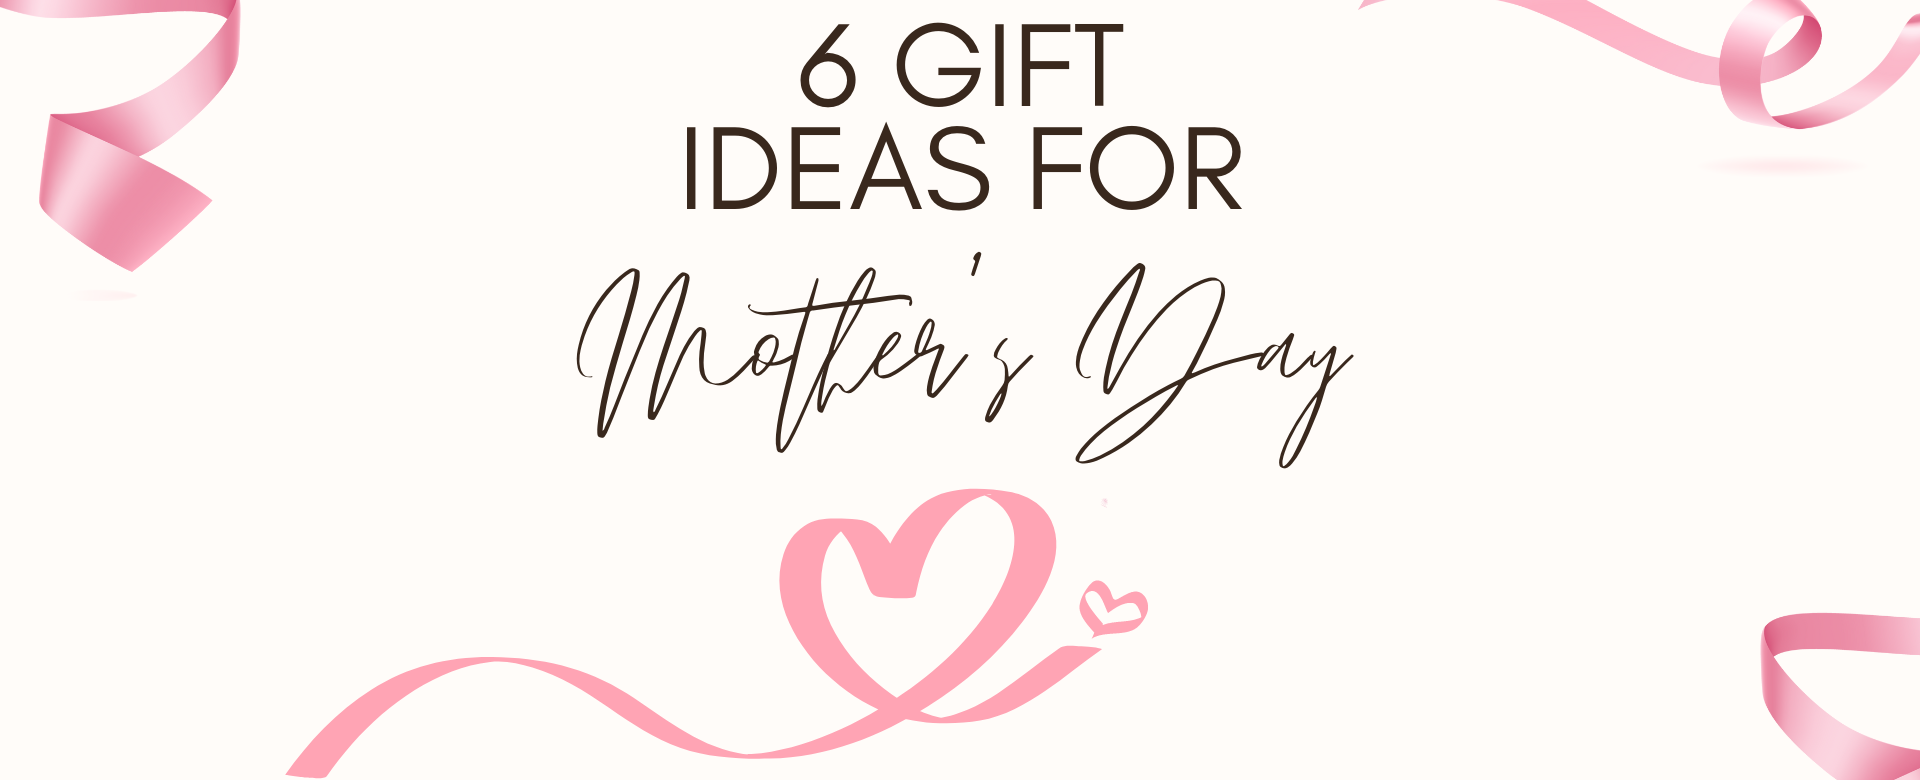 Mother's Day gift ideas with a luxurious touch: spa products, jewelry box, and a gift bag.